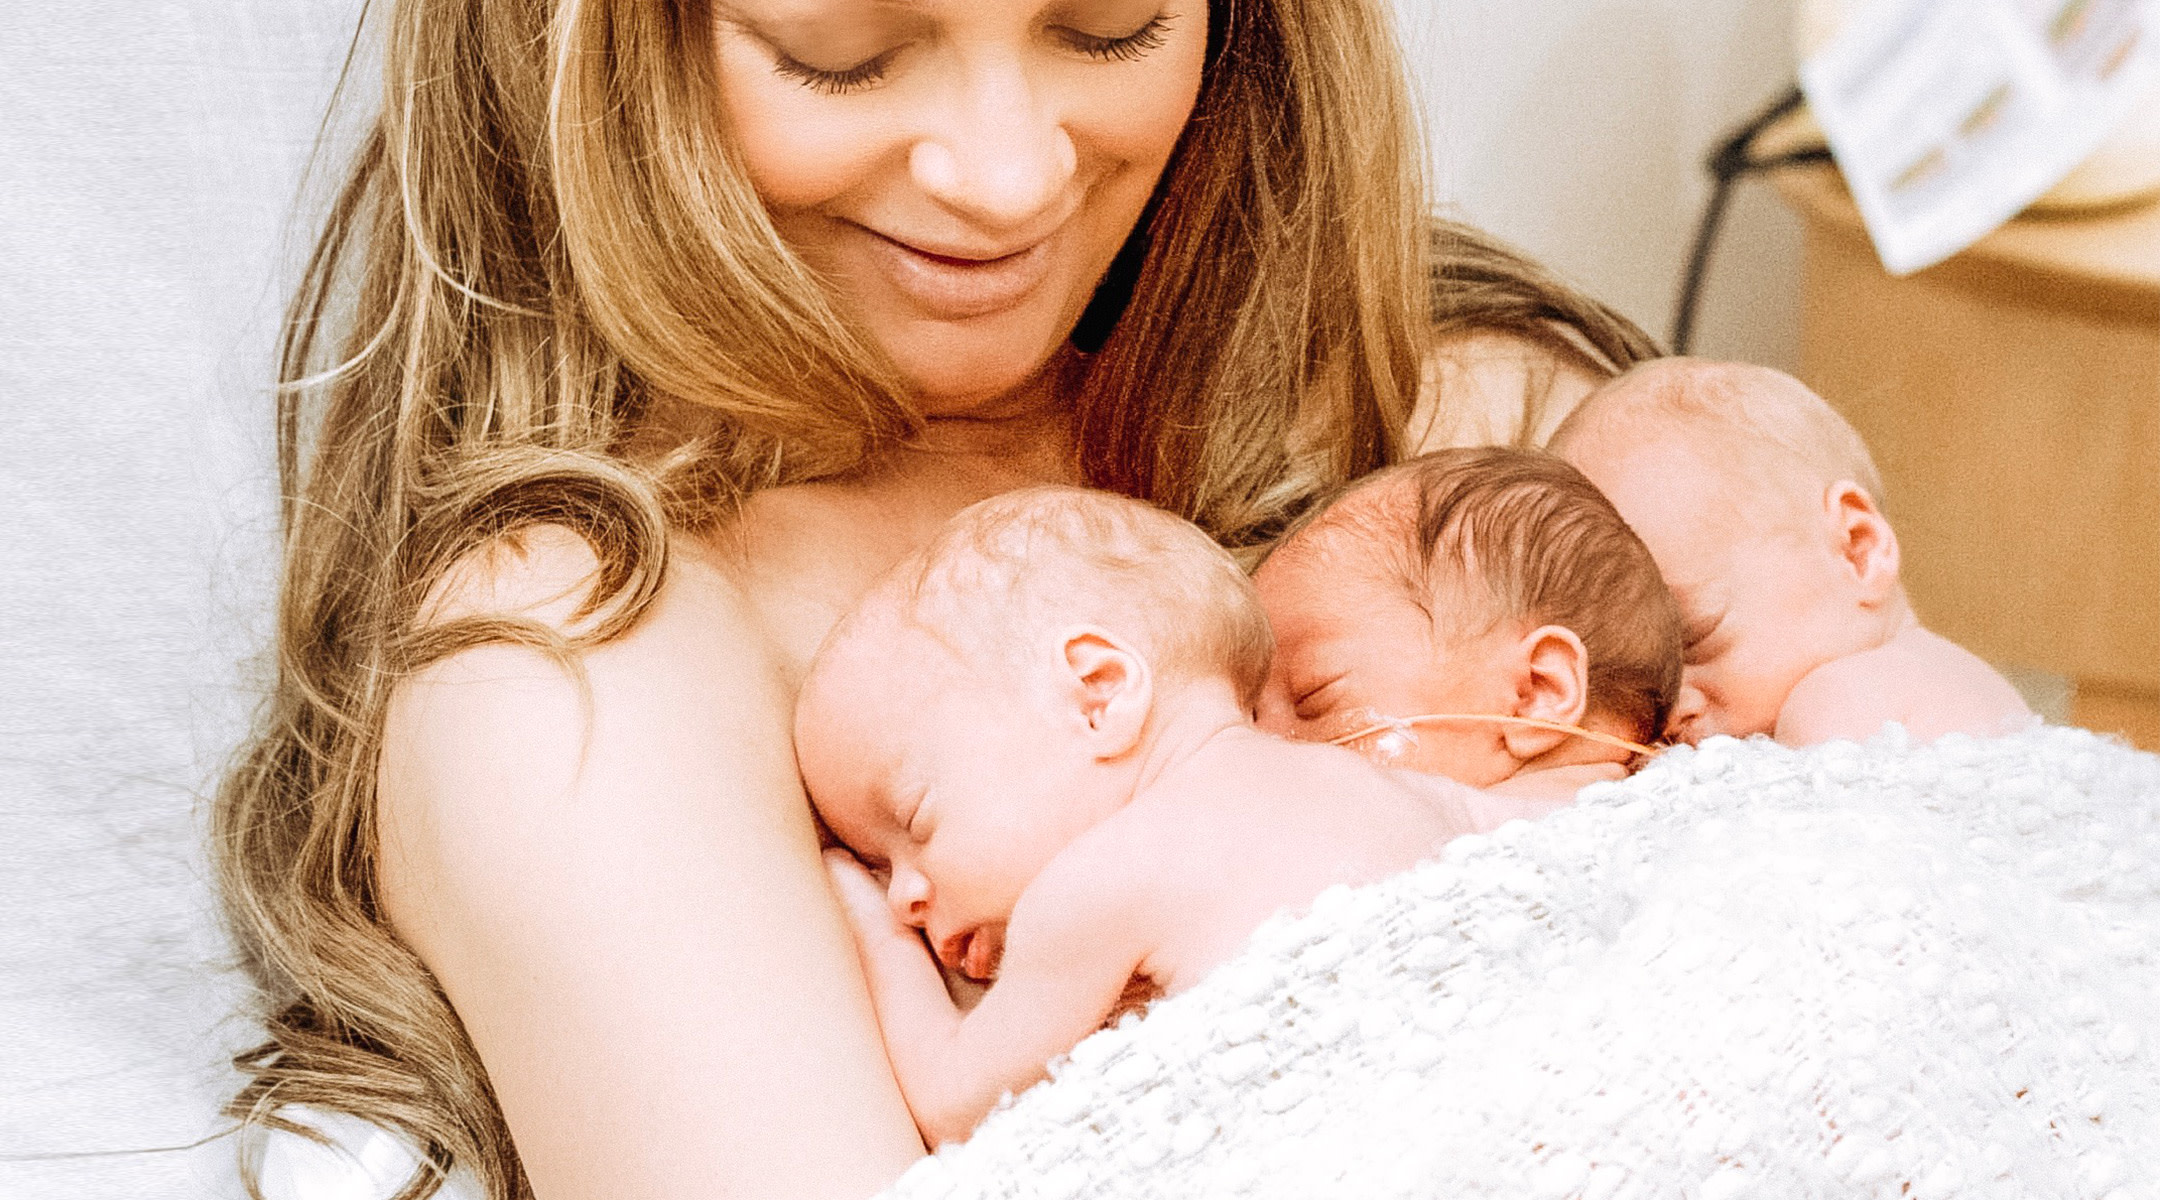 mom of triplets writes about month long experience in the nicu